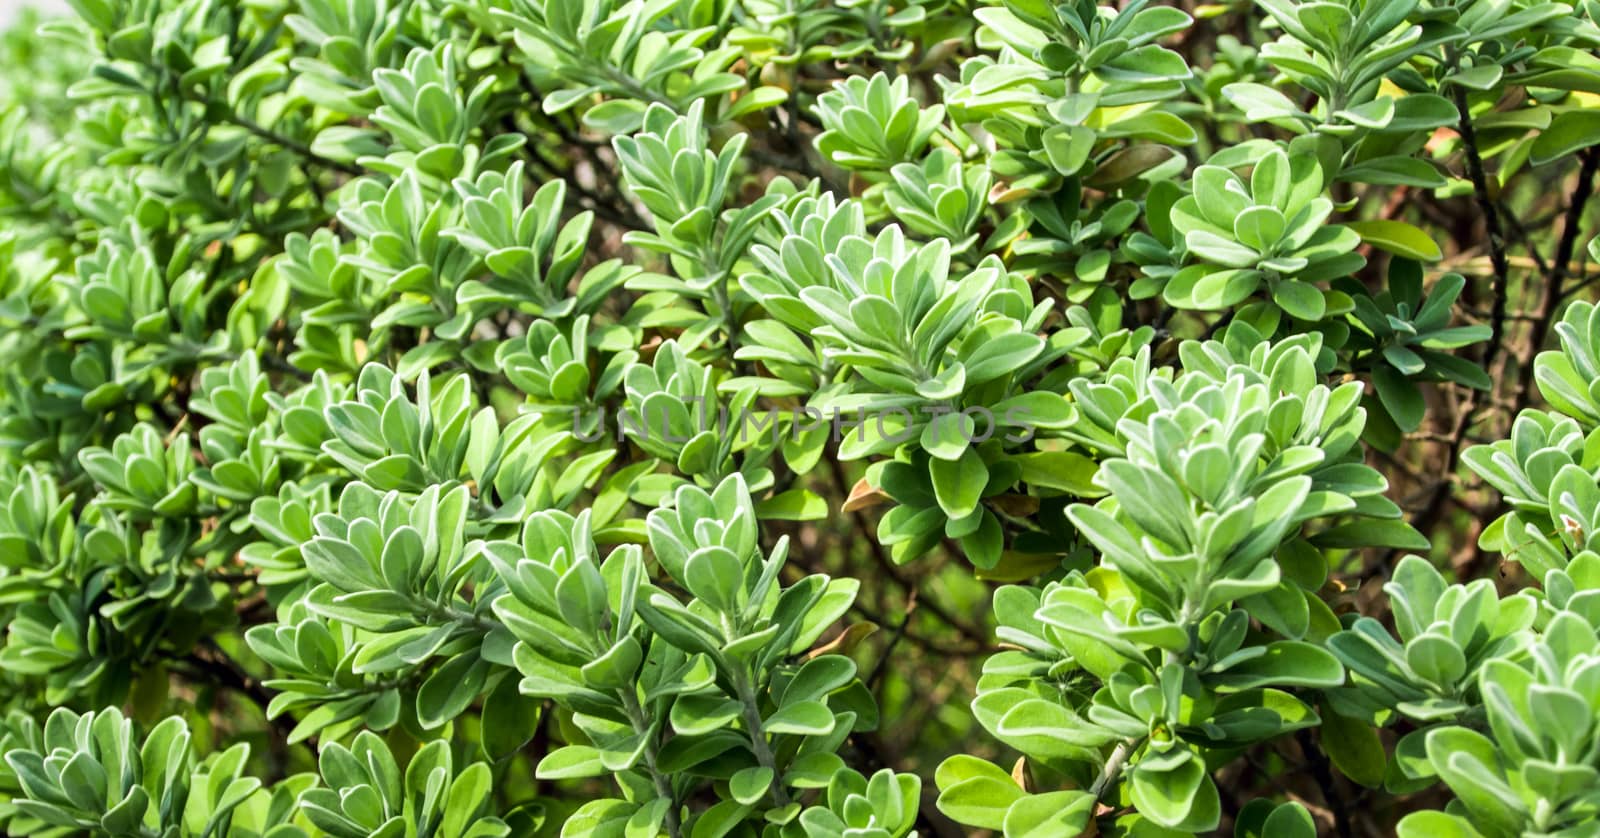 Leaves of plant as green background and plant texture